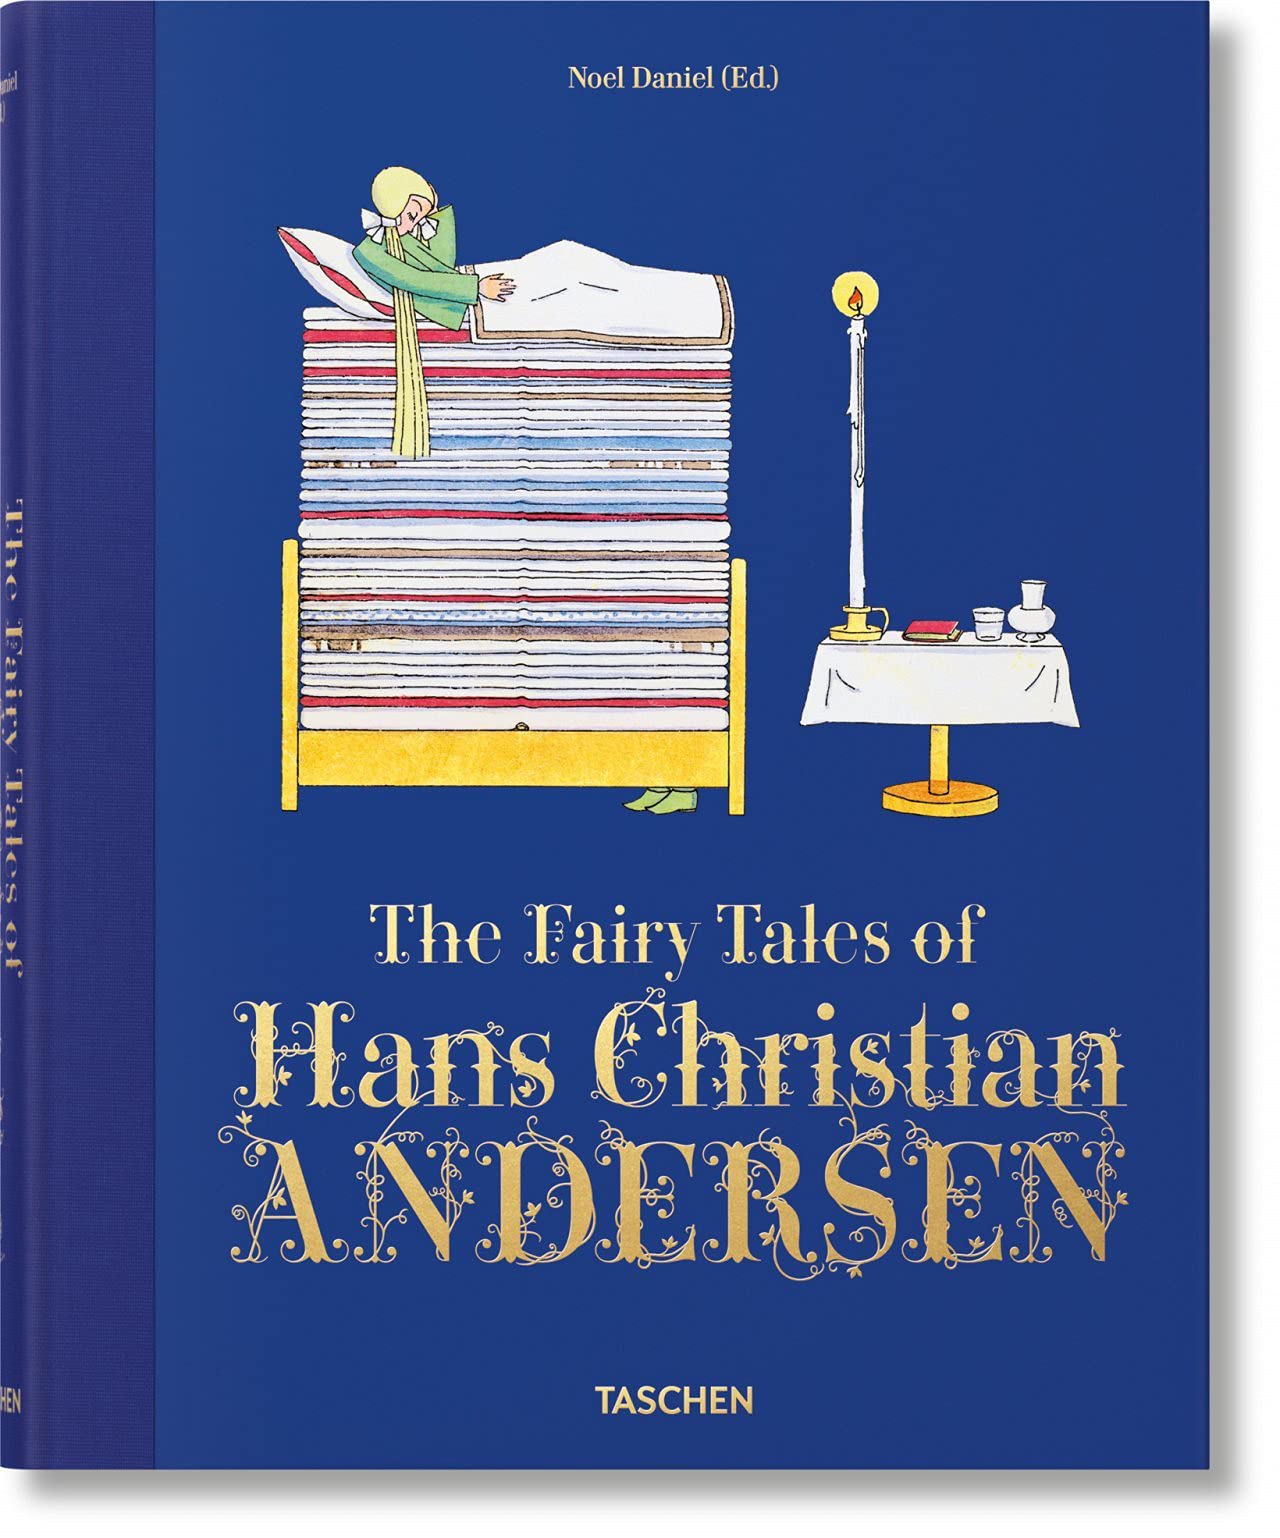 The Fairy Tales of Hans Christian Andersen | Hans Christian Andersen, Noel Daniel